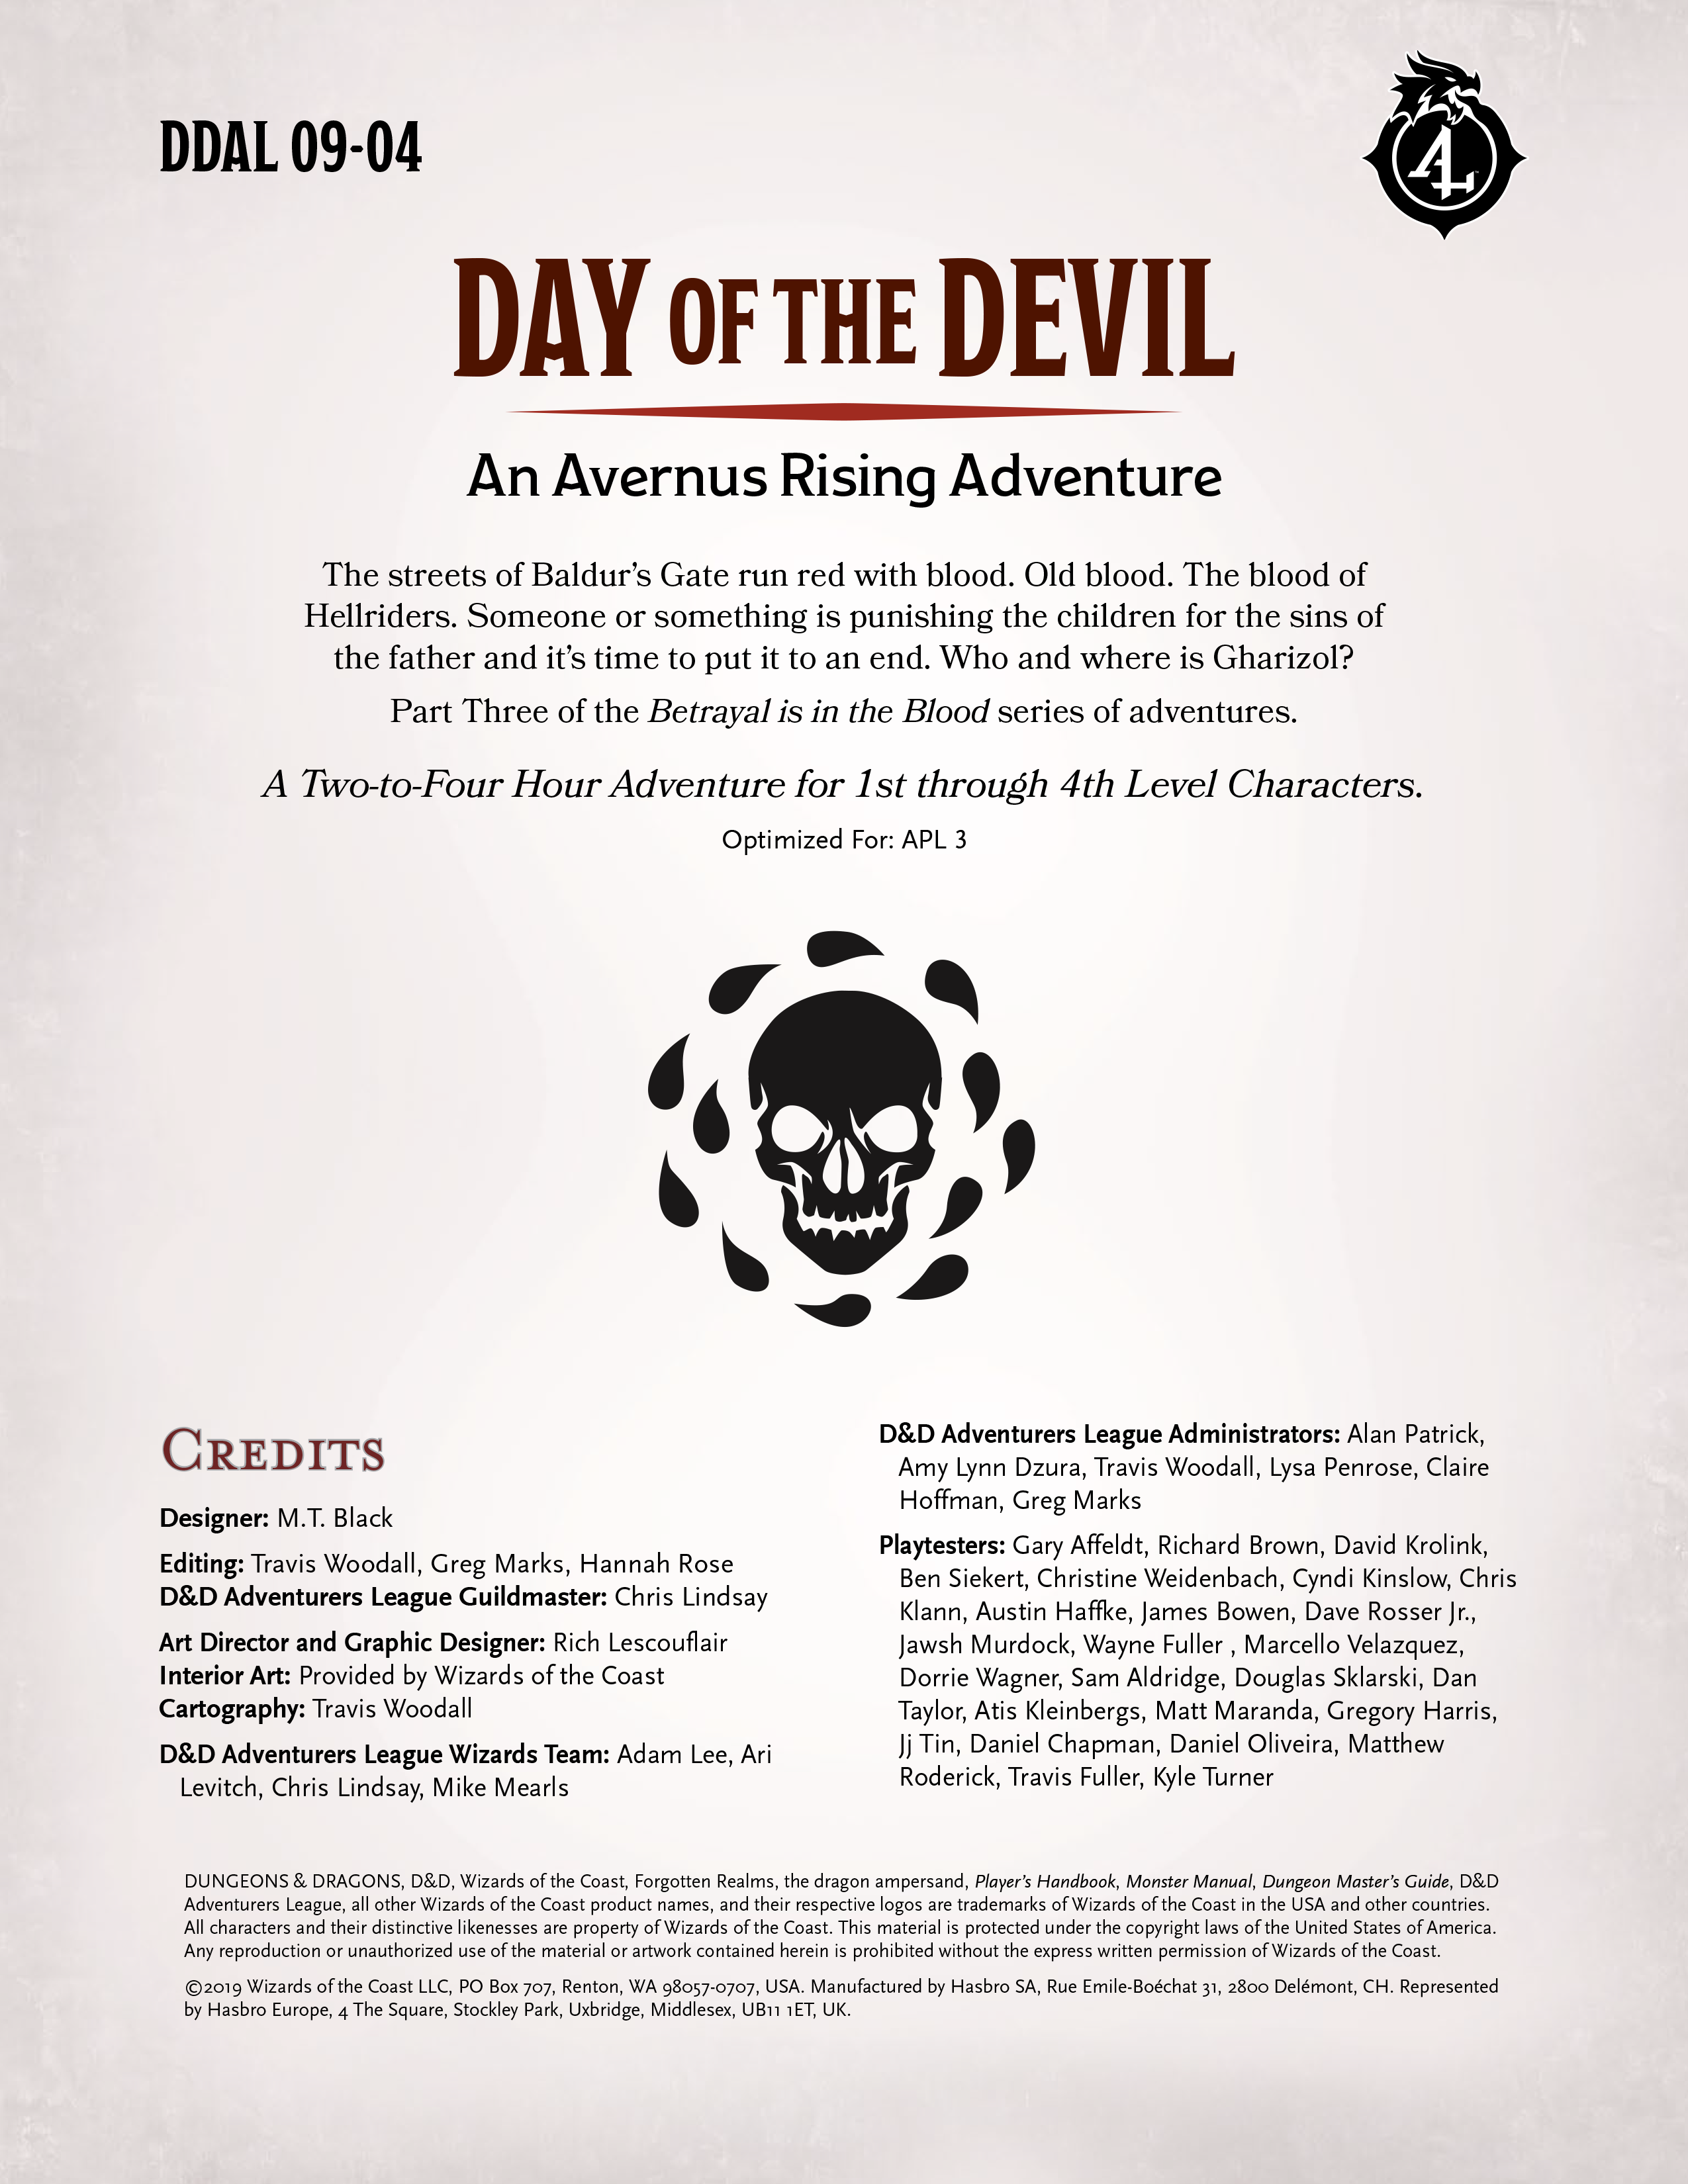 Day of the Devil